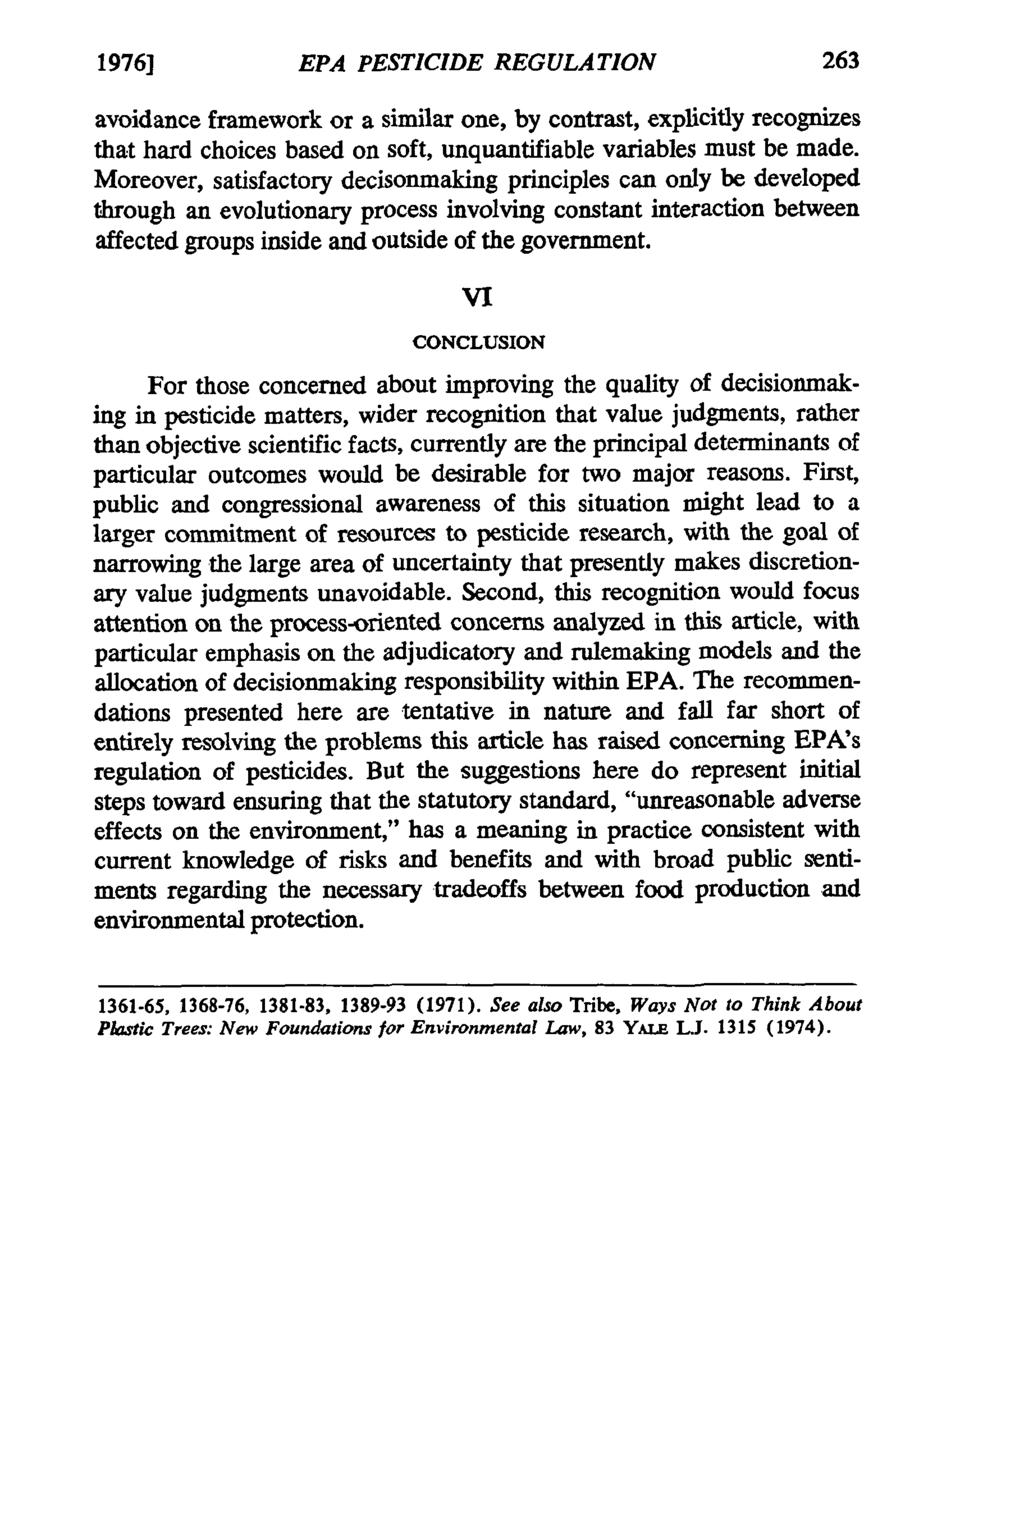 1976] EPA PESTICIDE REGULATION avoidance framework or a similar one, by contrast, explicitly recognizes that hard choices based on soft, unquantifiable variables must be made.